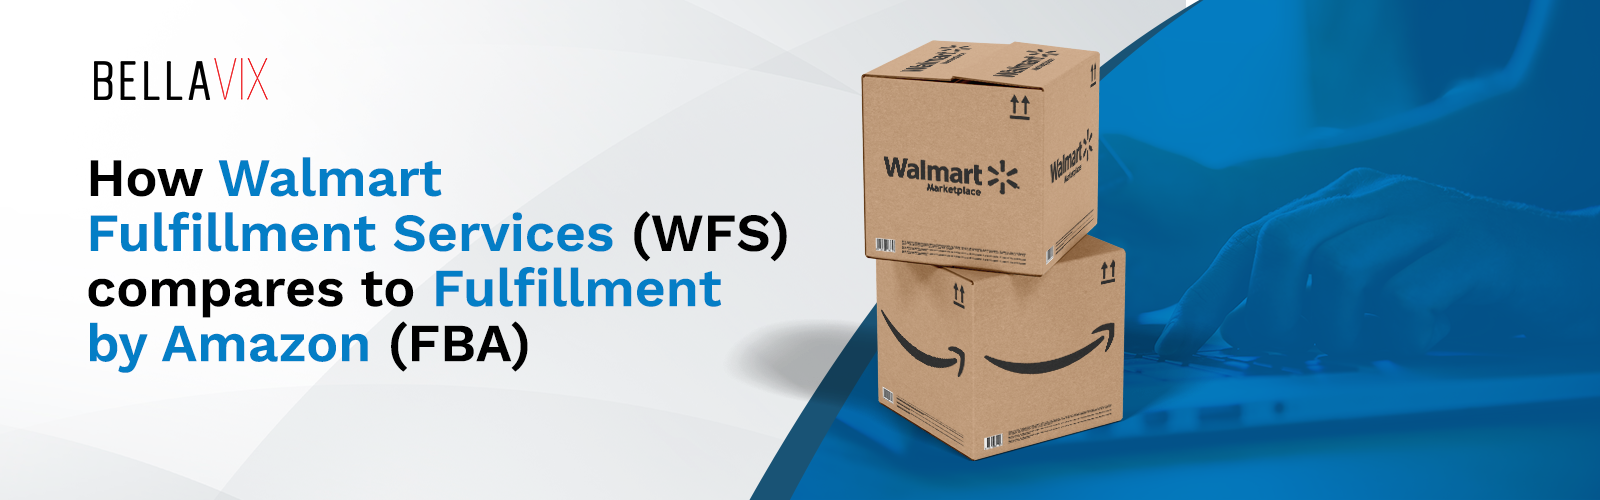 How Walmart Fulfillment Services (WFS) compares to Fulfilled by Amazon (FBA)